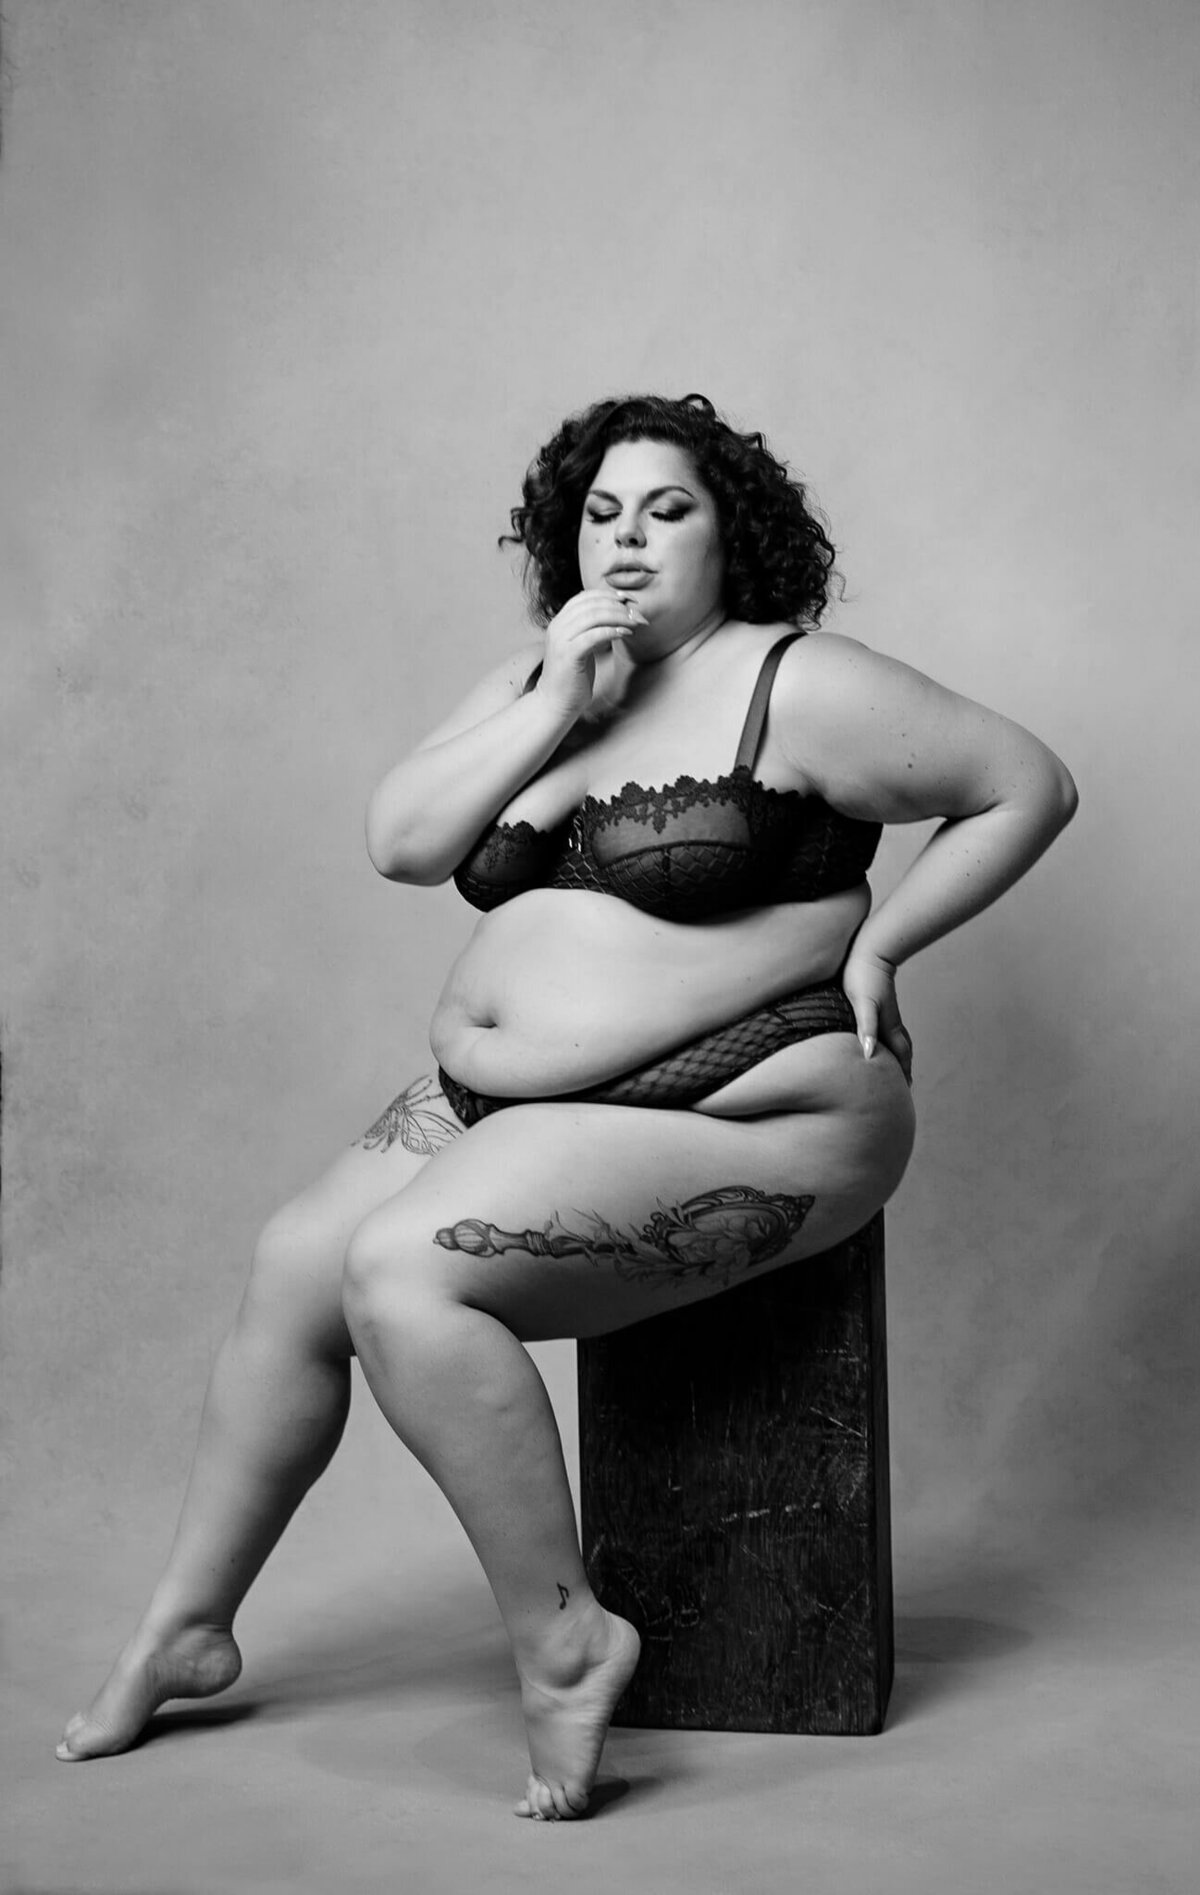 plus size woman is posing very sexy while seated in a photography boudoir studio